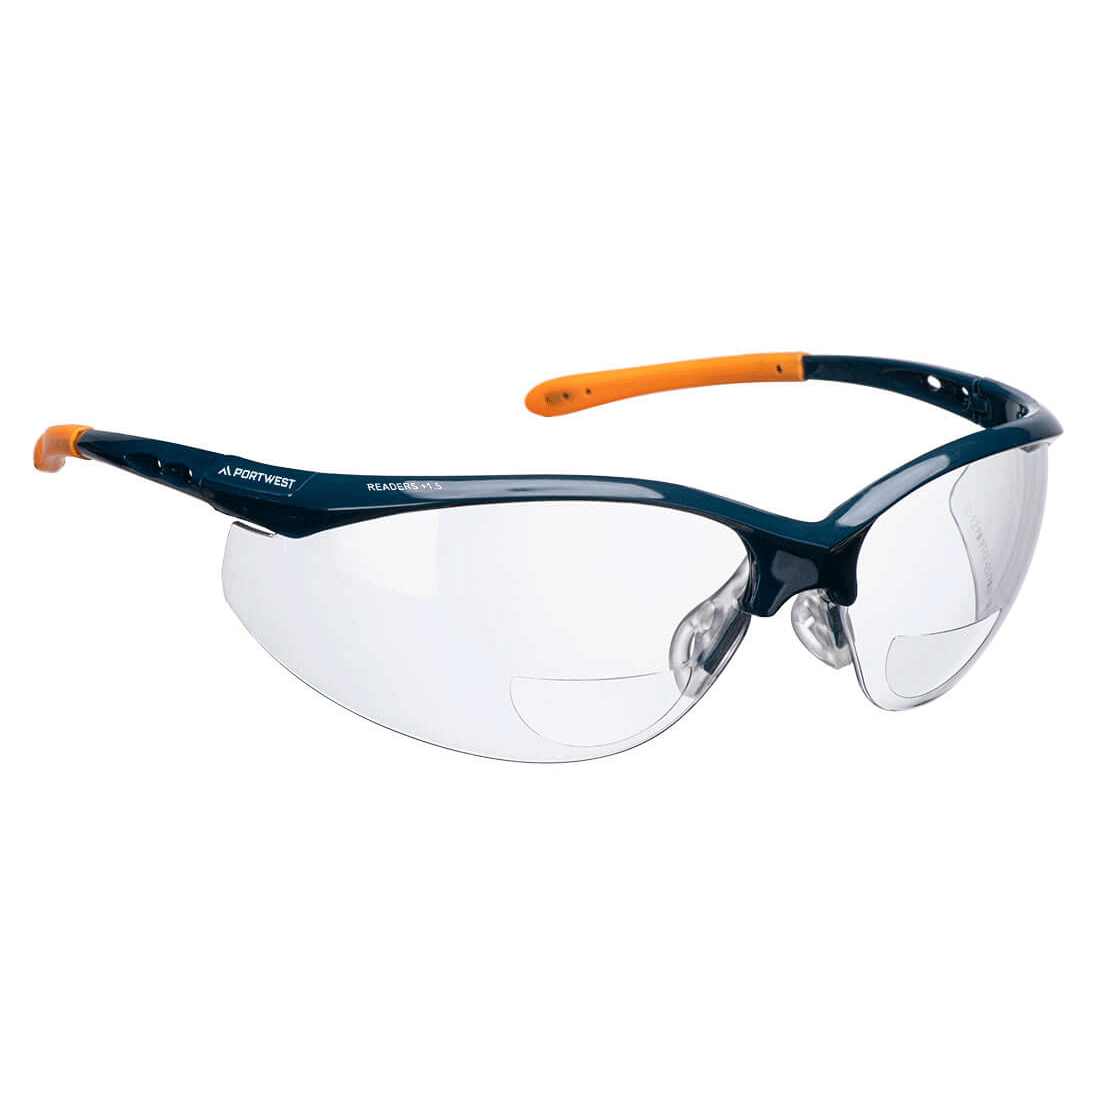 Safety Readers - Personal protection